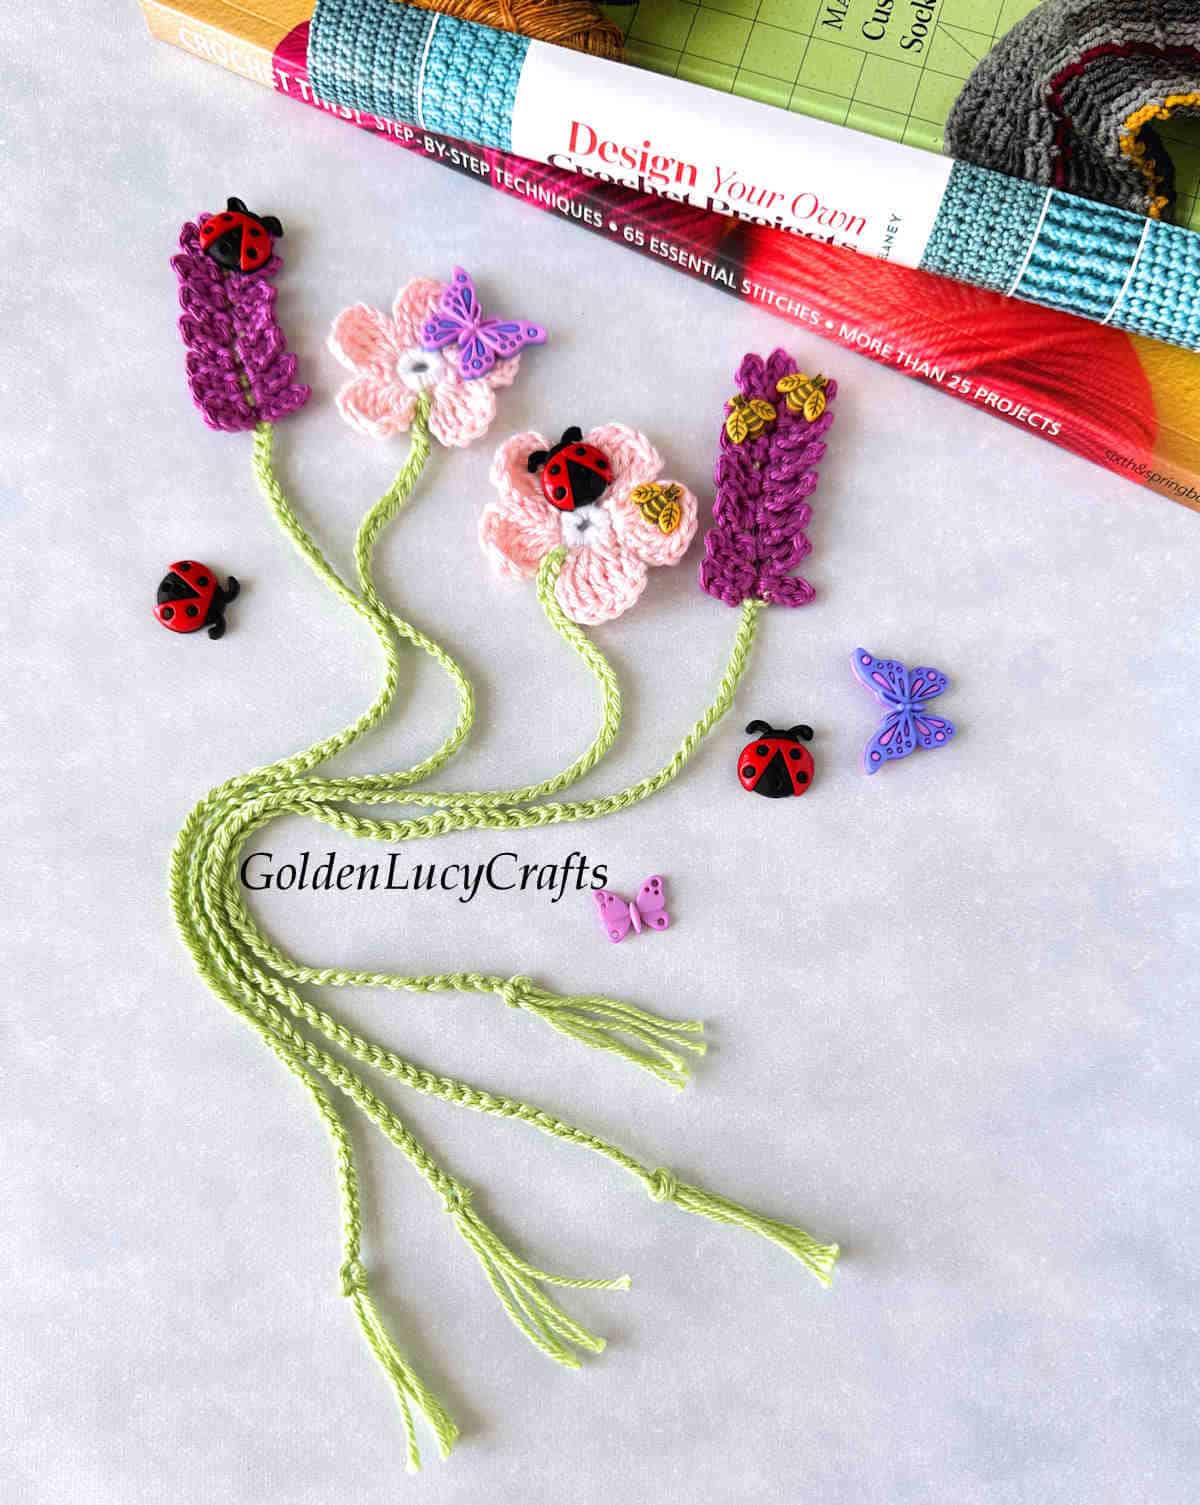 Crochet floral bookmarks embellished with craft buttons.